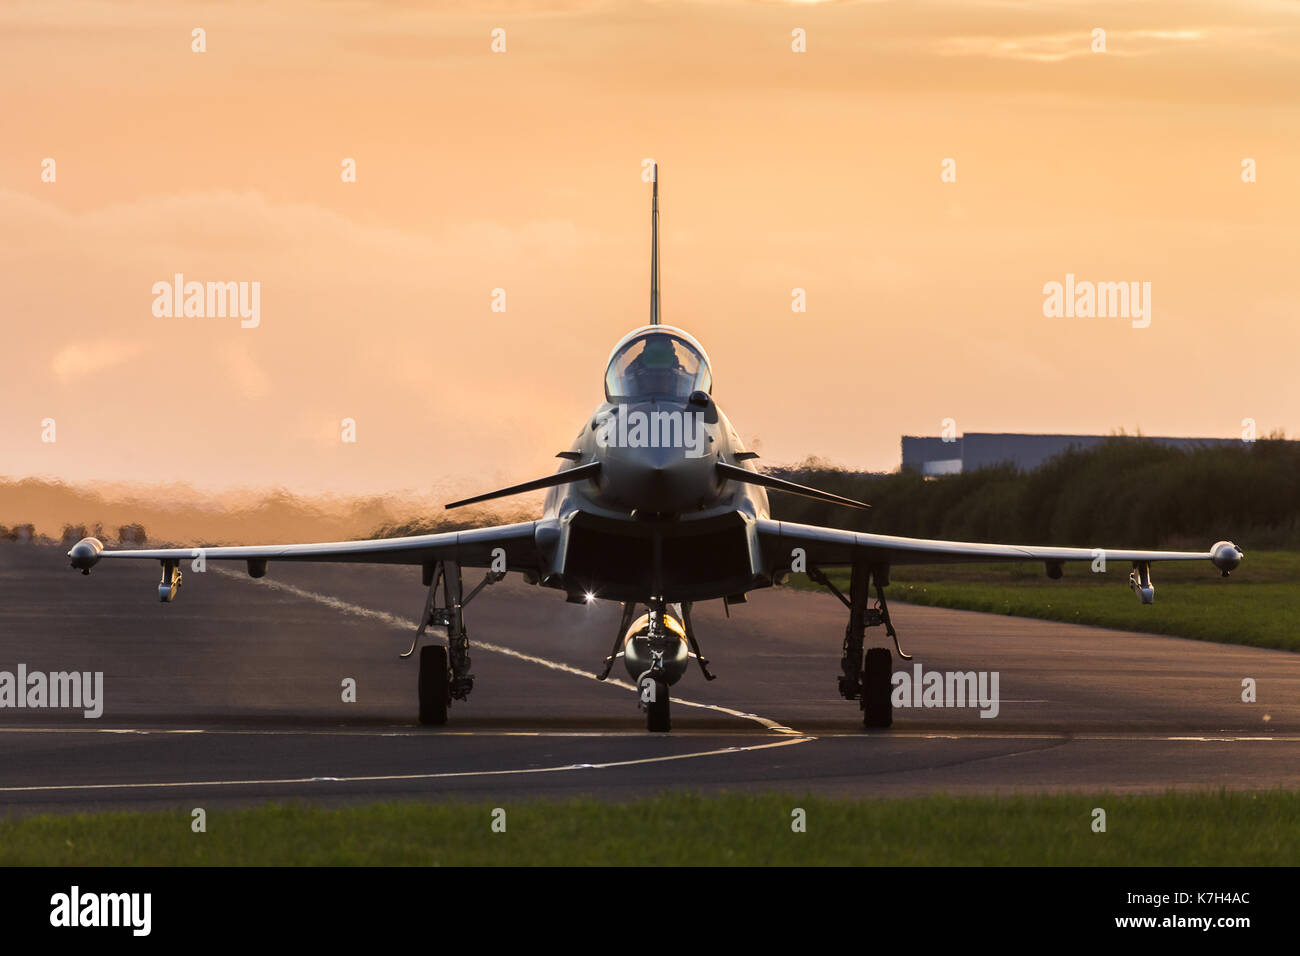 A Royal Air Force Typhoon jet taxis out towards the runway at Liverpool John Lennon airport at sunset ready for takeoff. Stock Photo